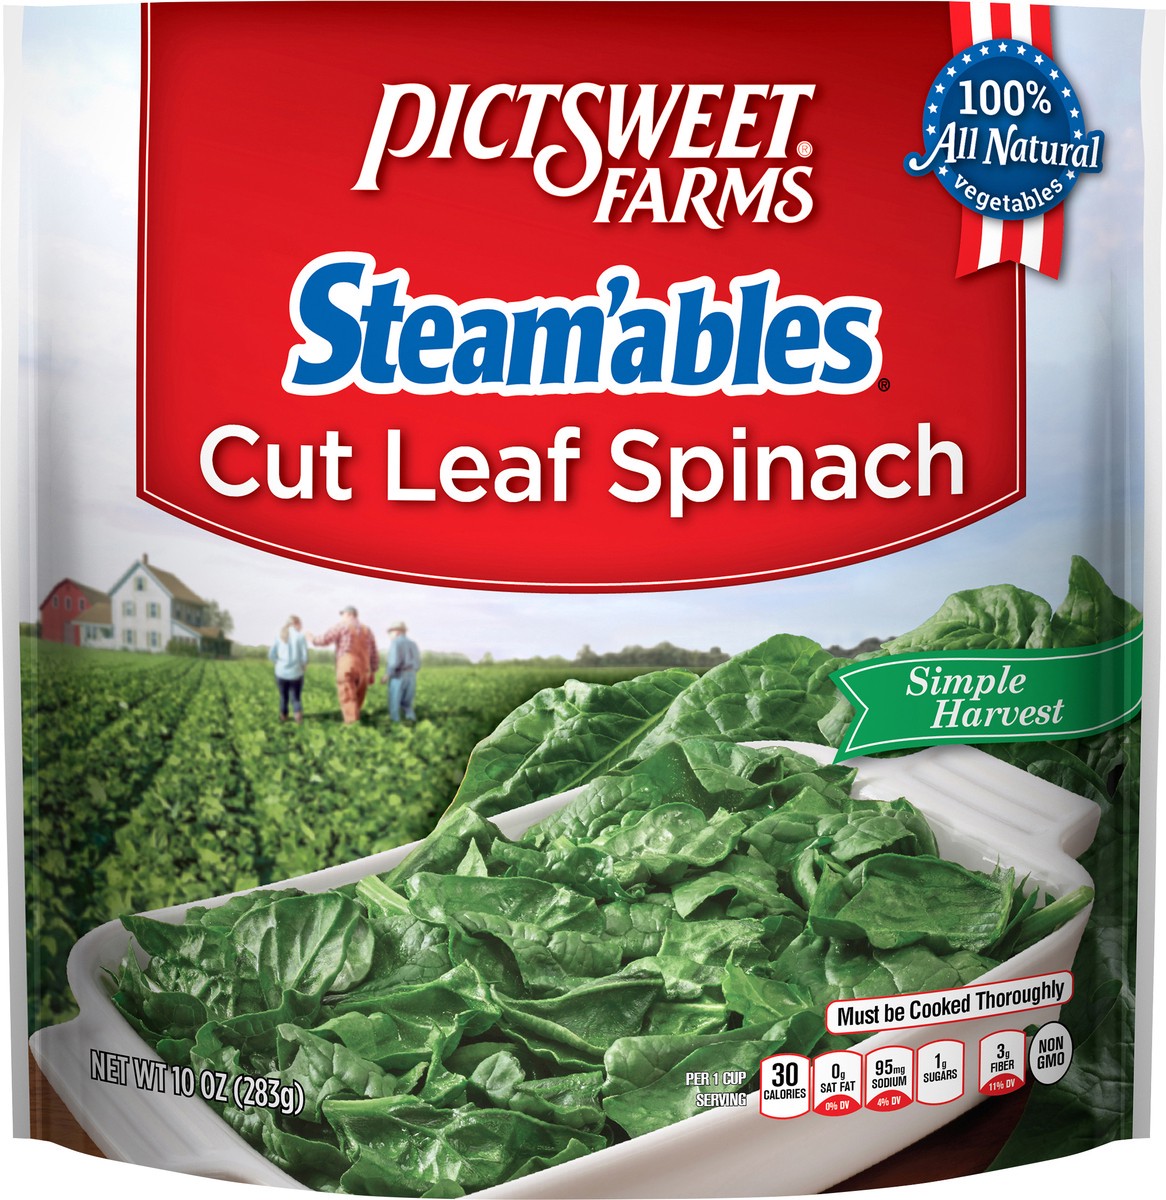 slide 3 of 3, Pictsweet Farms Steam'ables Cut Leaf Spinach, Simple Harvest - 10 oz, 10 oz